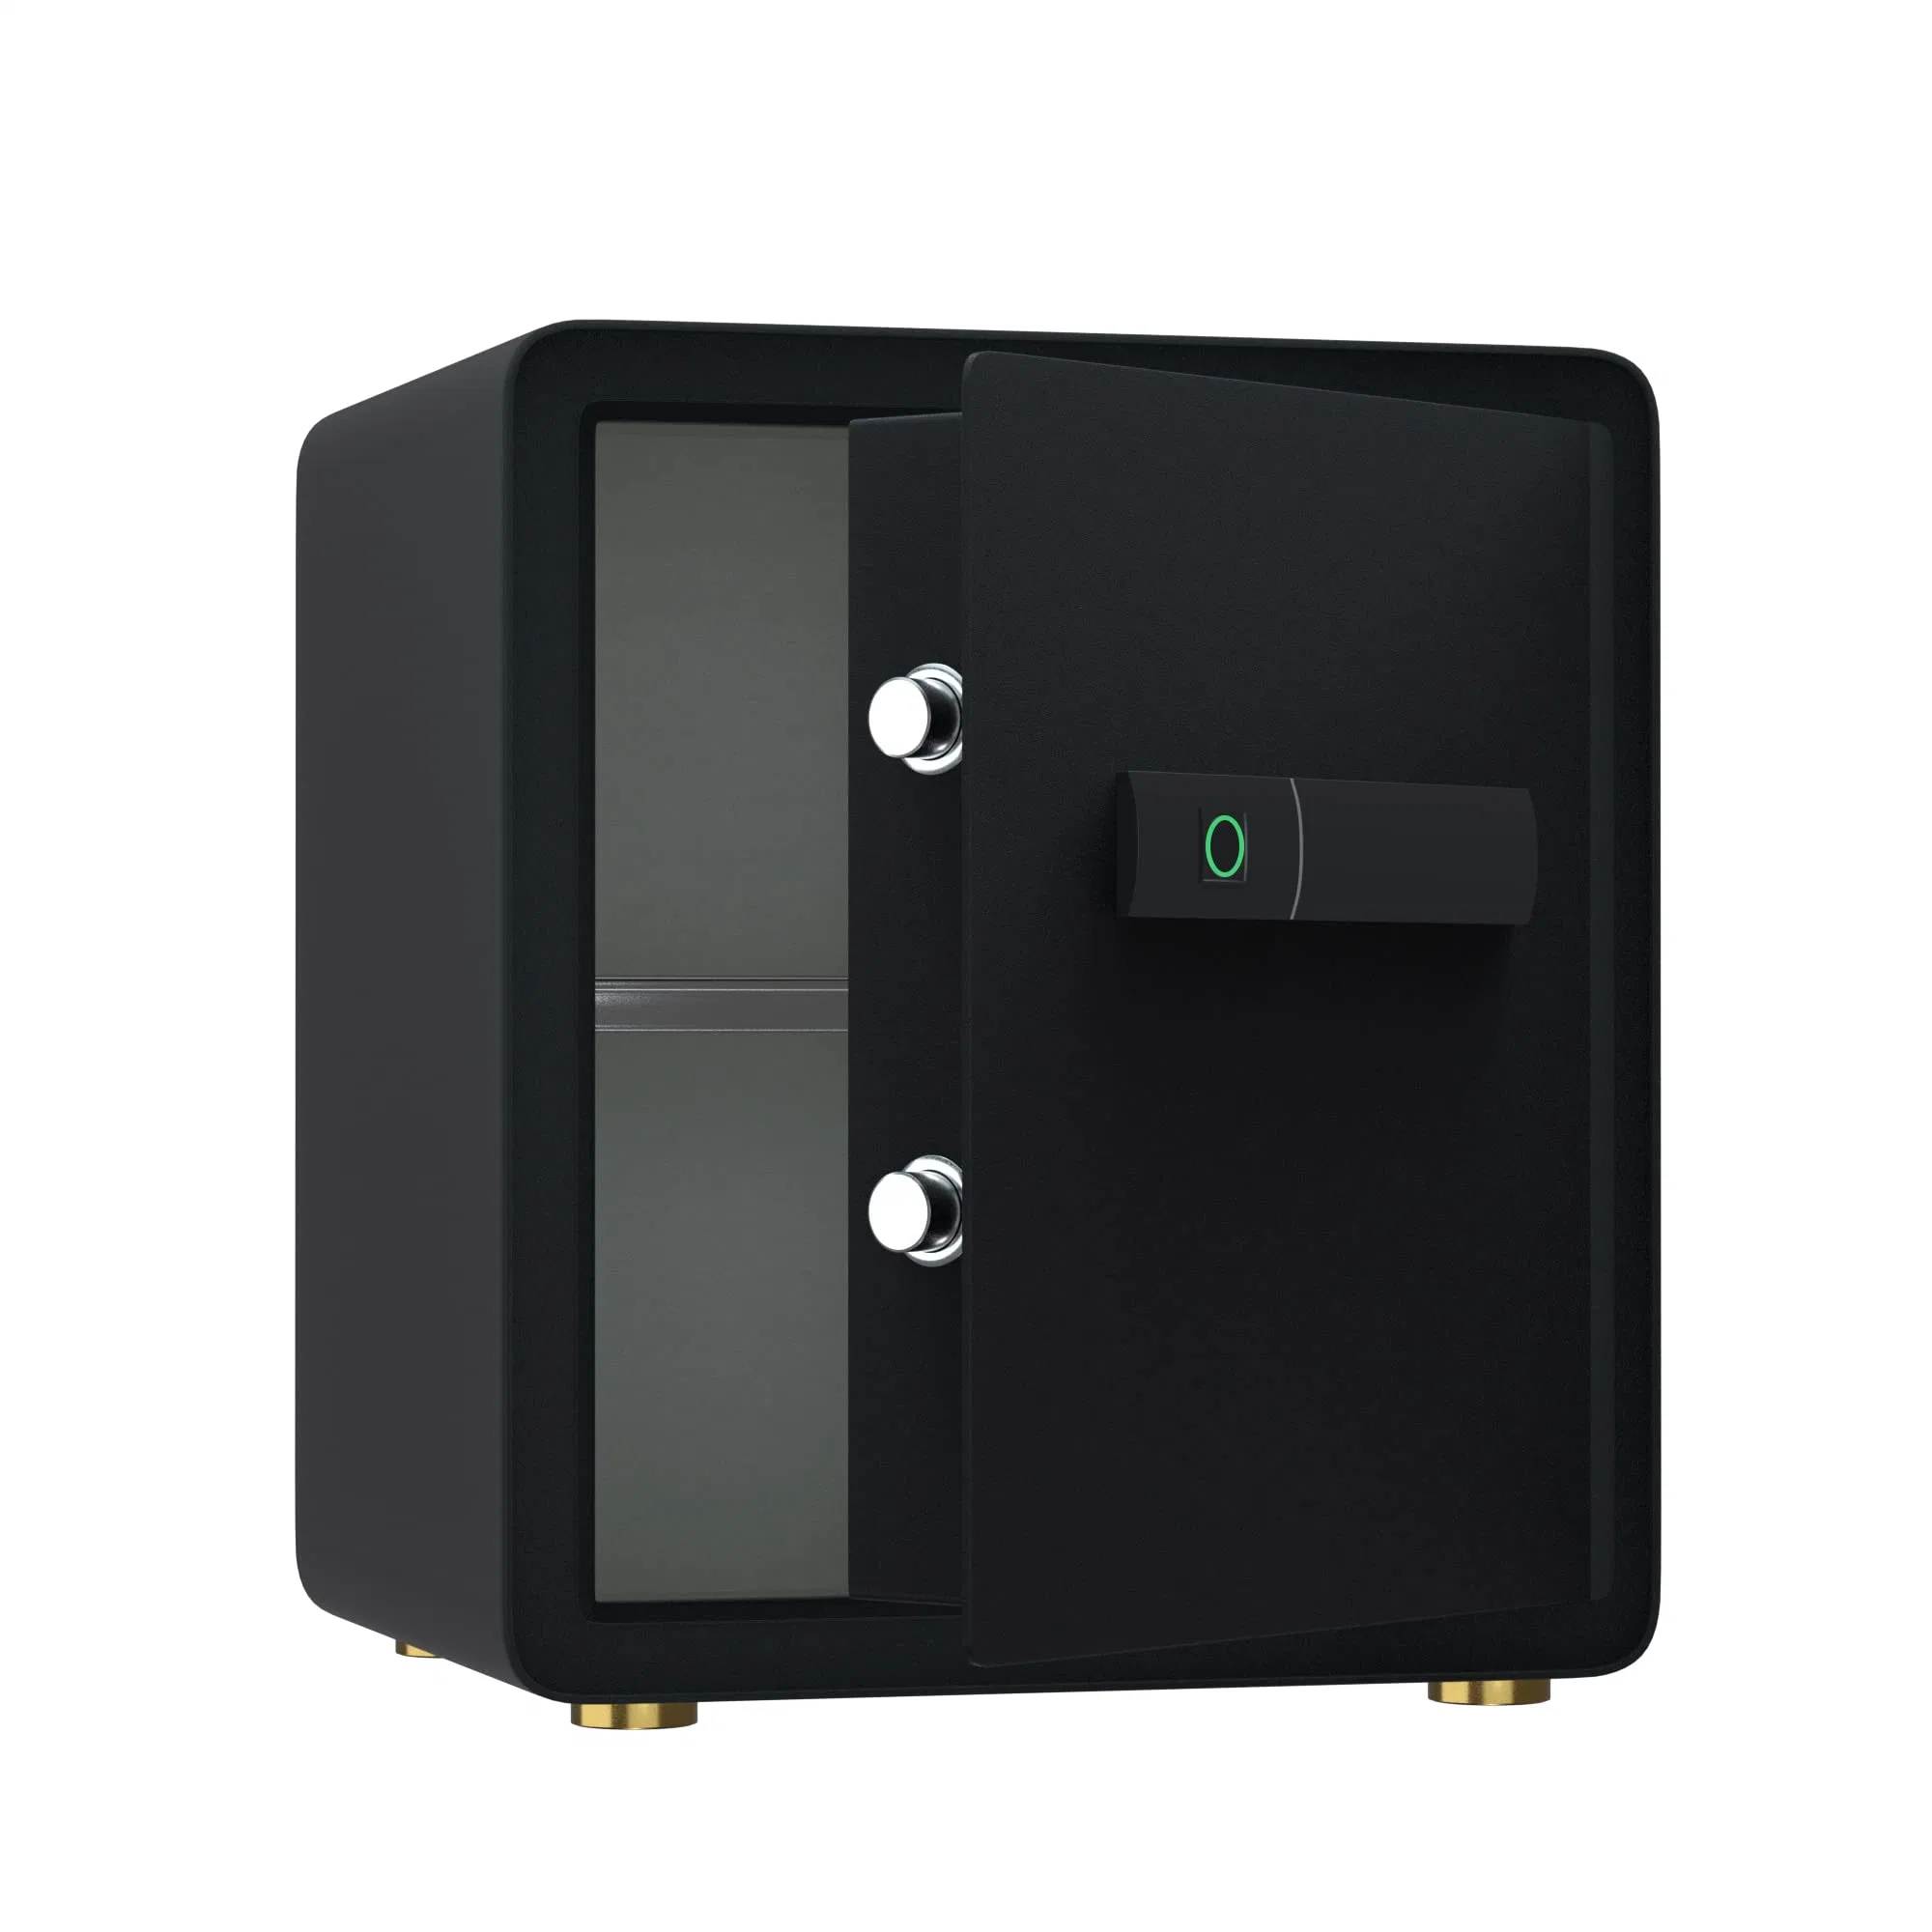 High quality/High cost performance Fingerprint Lock Home Safe Box for Secure Money / Jewelry / Document